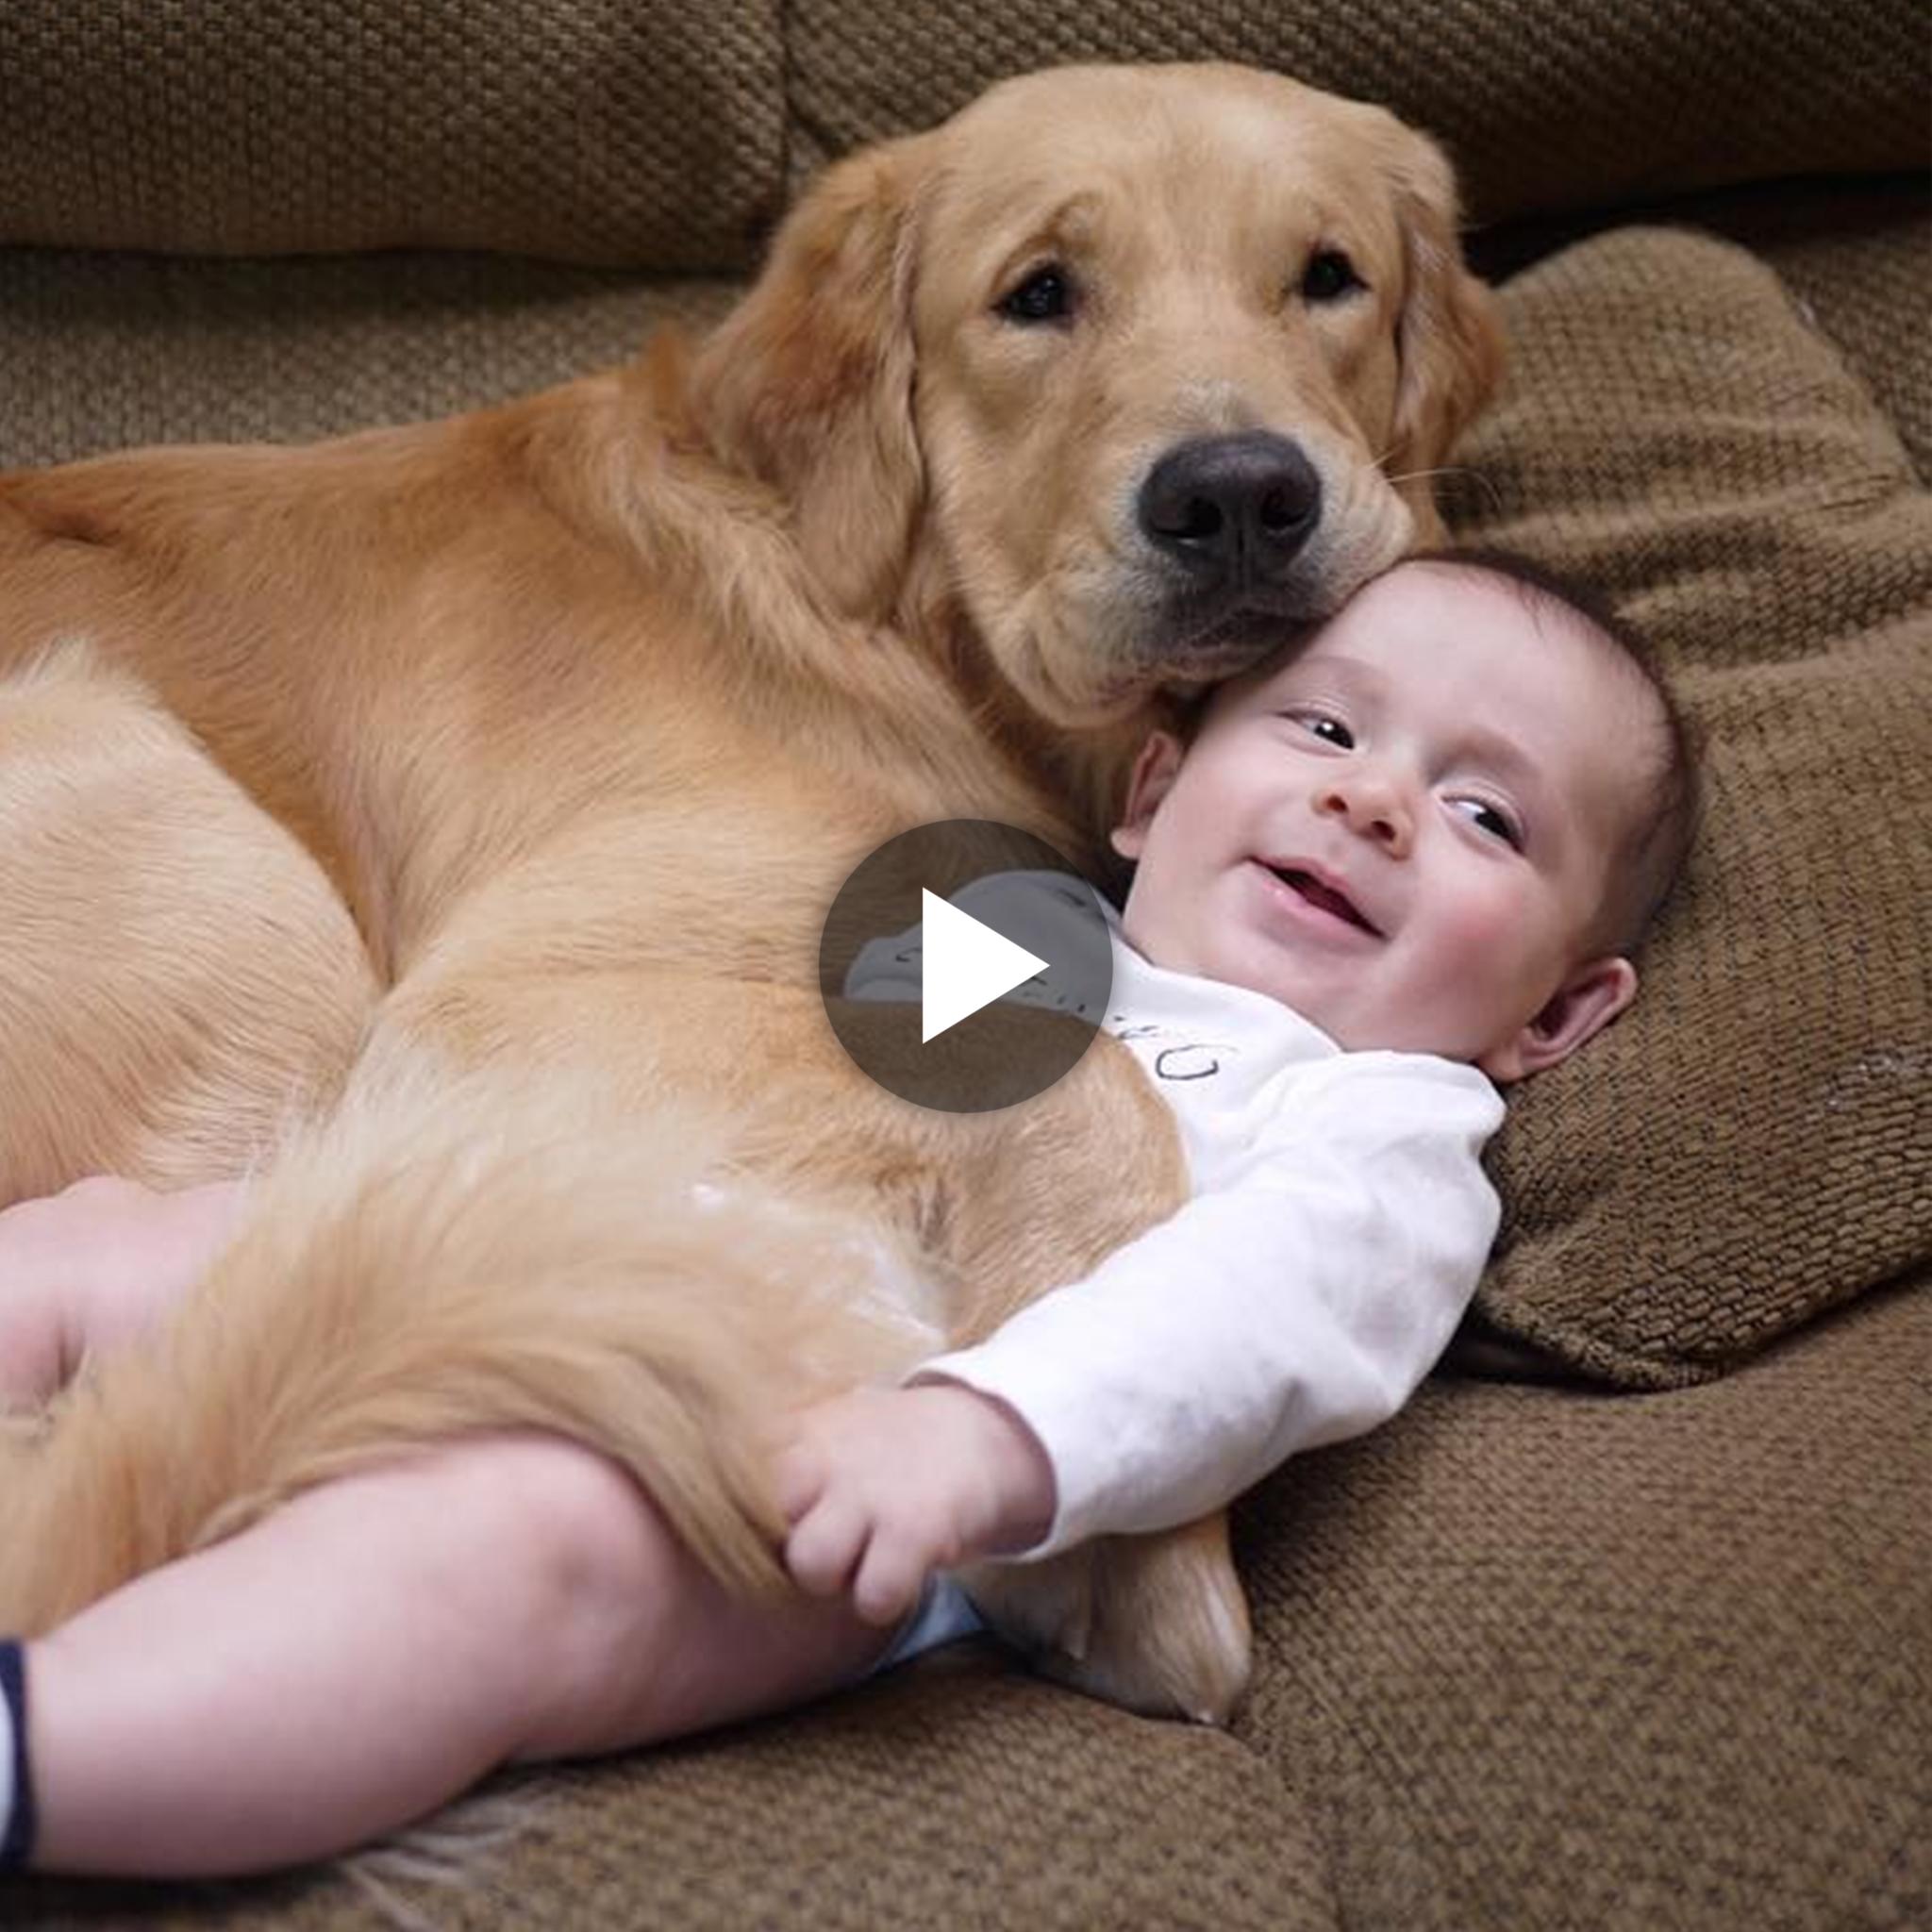 The dog transforms into a babysitter, taking care of the baby’s sleep